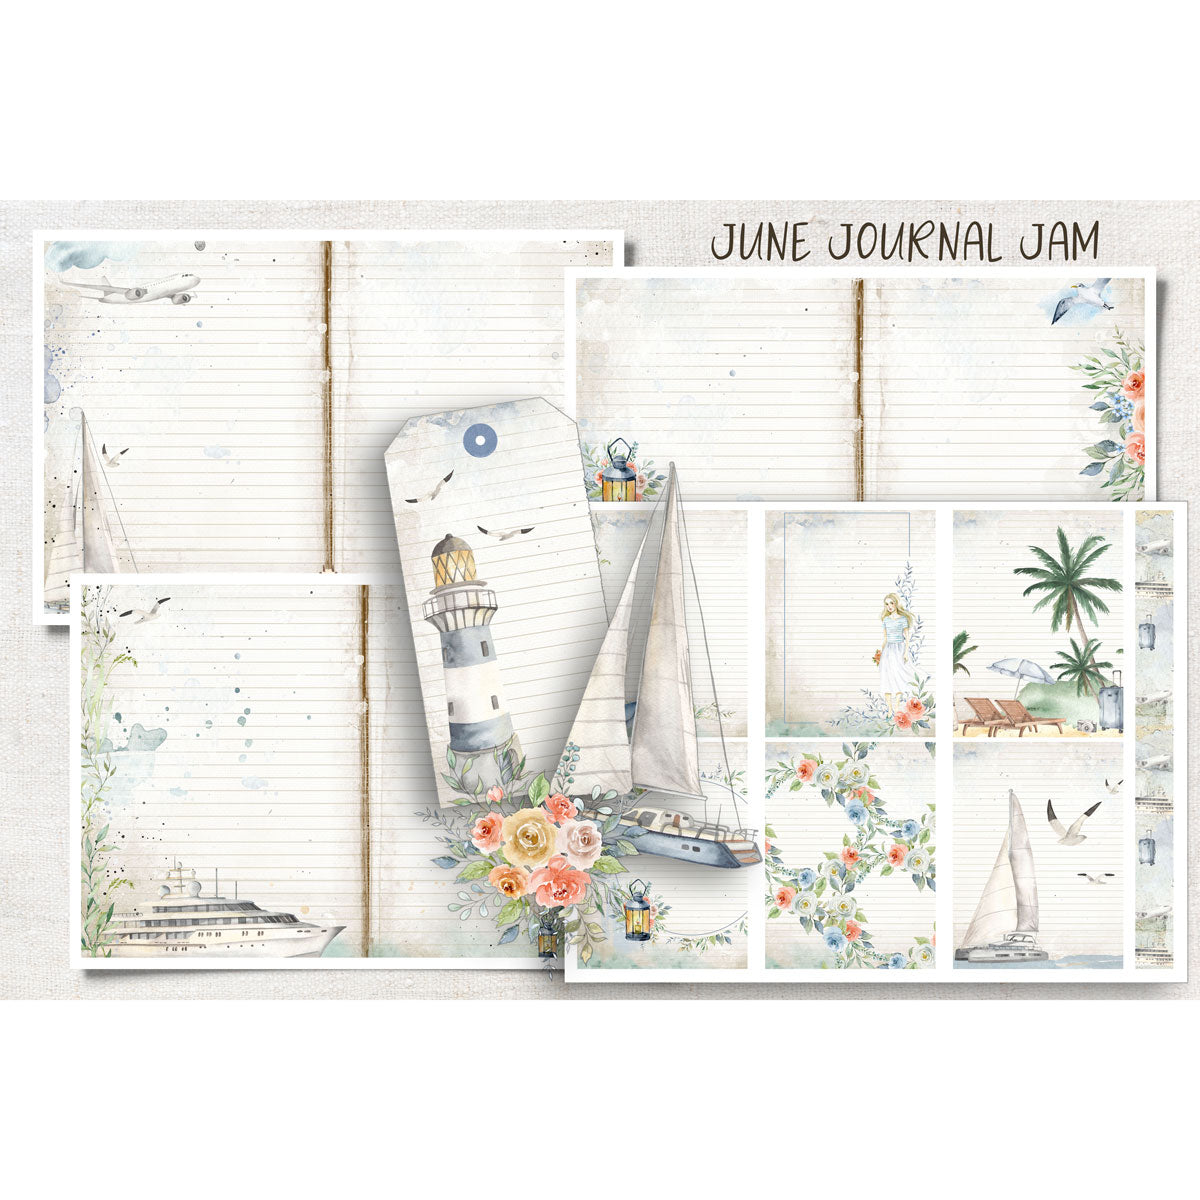 Journal Jam 2022 - June - PAPERS ONLY